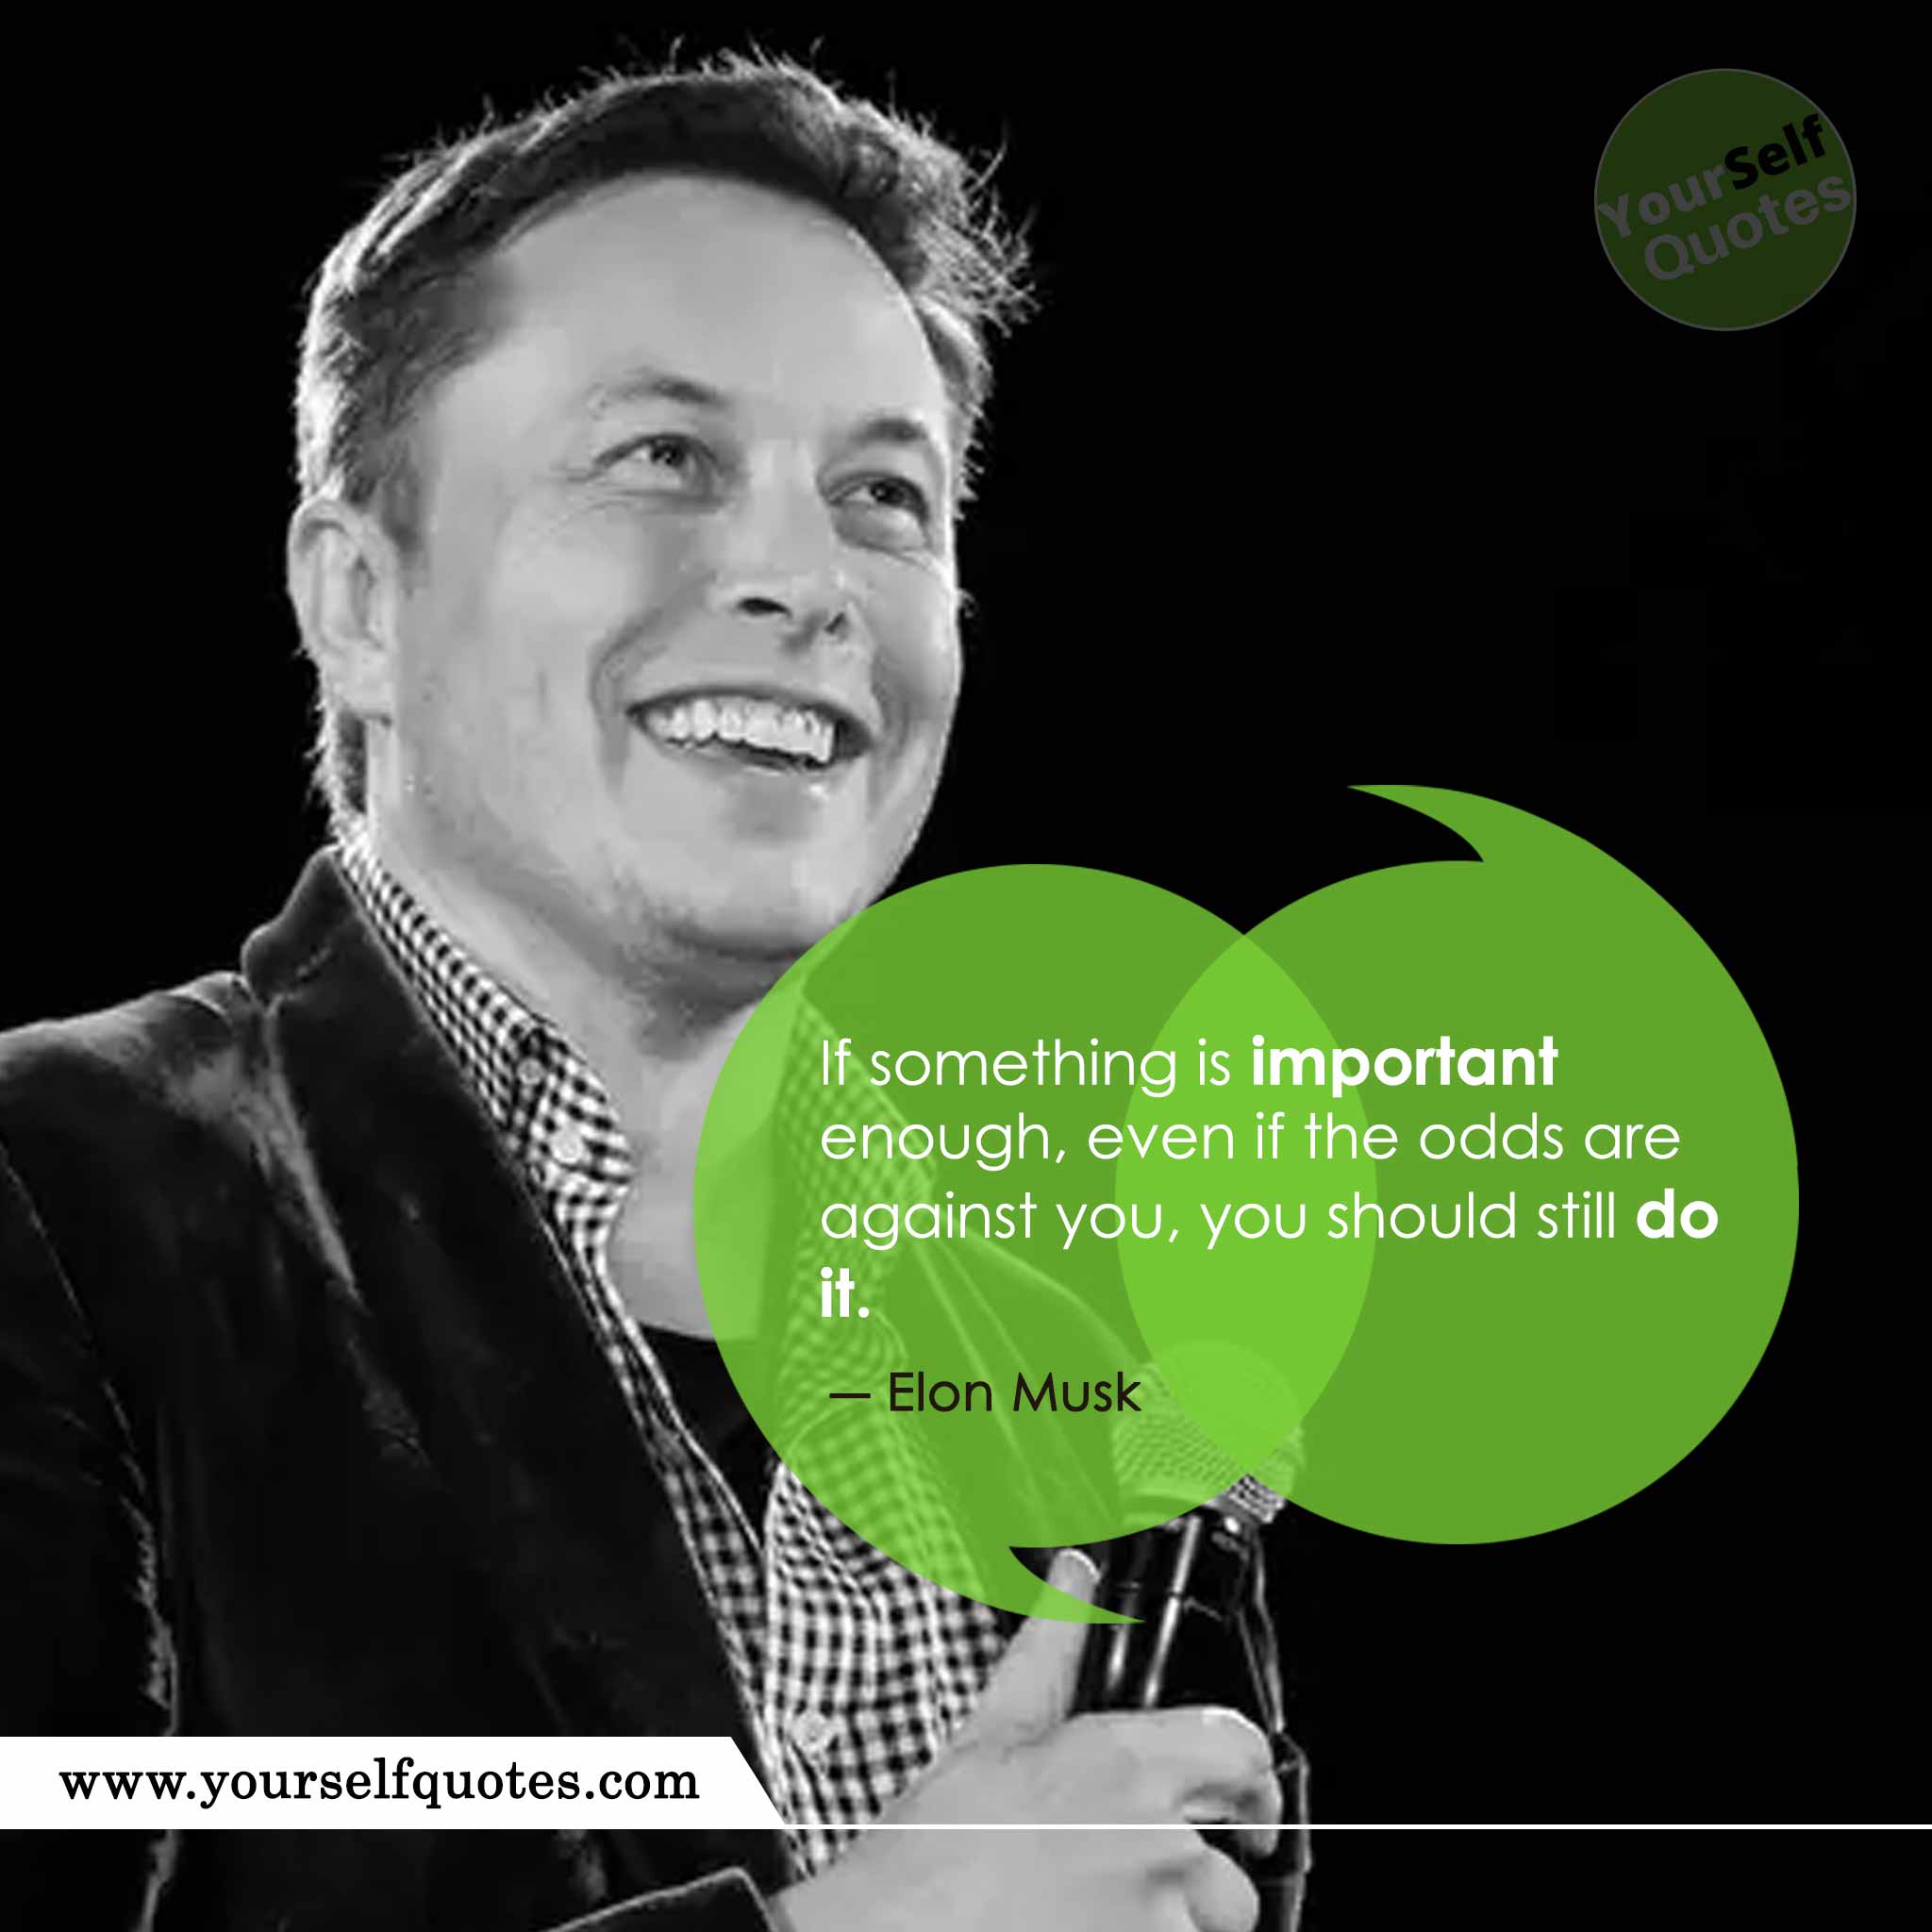 Elon Musk Quotes On Success in Life